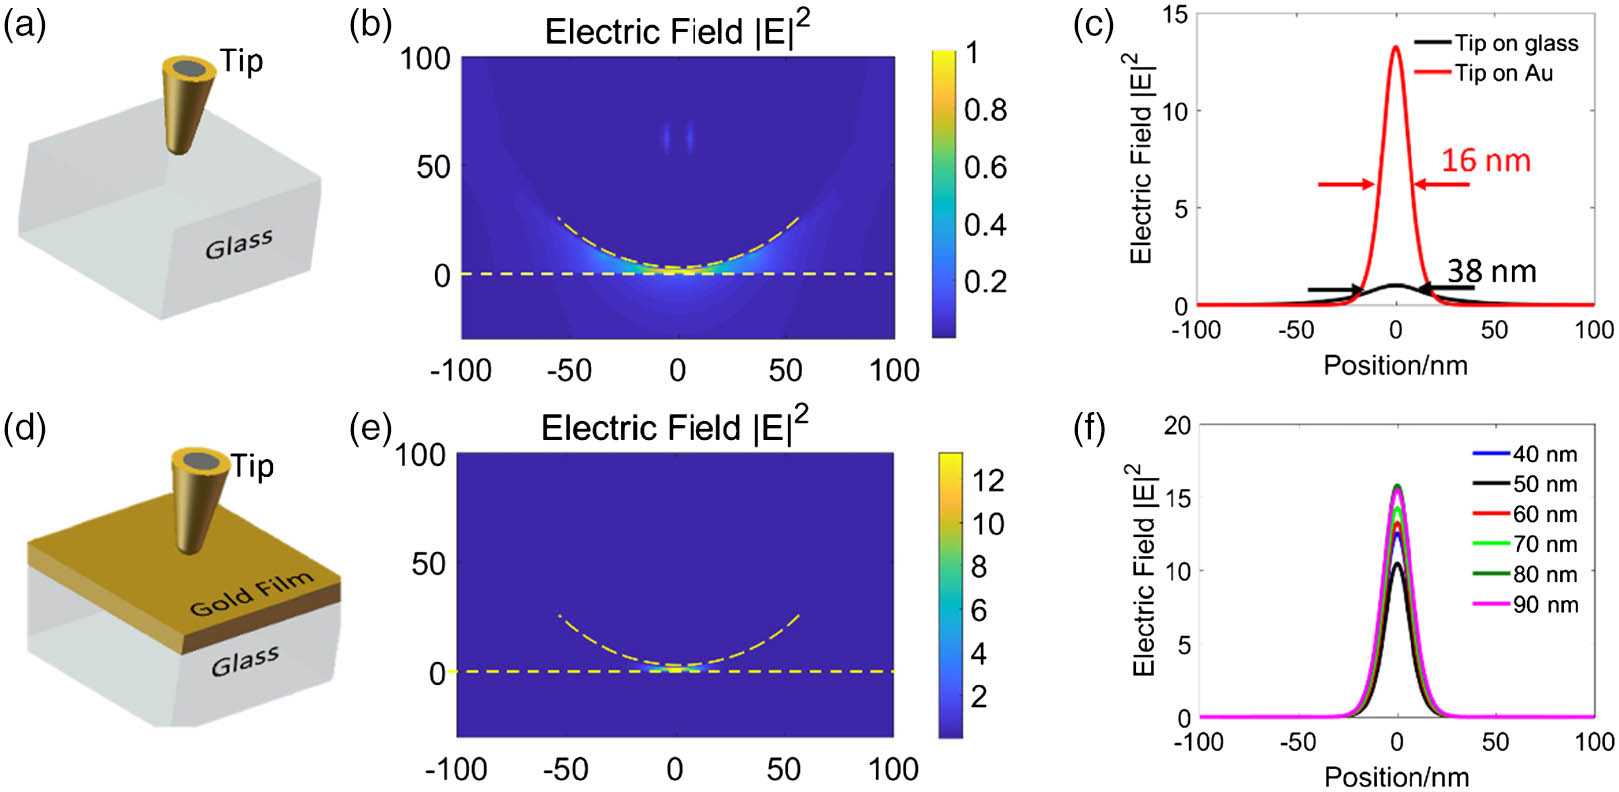 Numerical calculation of the electric field normalized to the traditional tightly focused electric field. (a) Schematic of the tip on glass. (b) Calculated electric field |E|2 distribution of the gold-coated tip apex on glass substrate excited by a tightly focused radially polarized 632.8 nm laser. (c) Profiles of the electric field |E|2 along the line through the center plane of the gap volume. (d) Schematic of the tip on gold film. (e) Calculated electric field |E|2 distribution of the gold-coated tip apex on gold film. (f) Profiles of the electric field |E|2 with different gold coating thicknesses. The yellow dashed lines denote the surface of the substrate and the tip apex. Axes units in (b) and (e): nm.